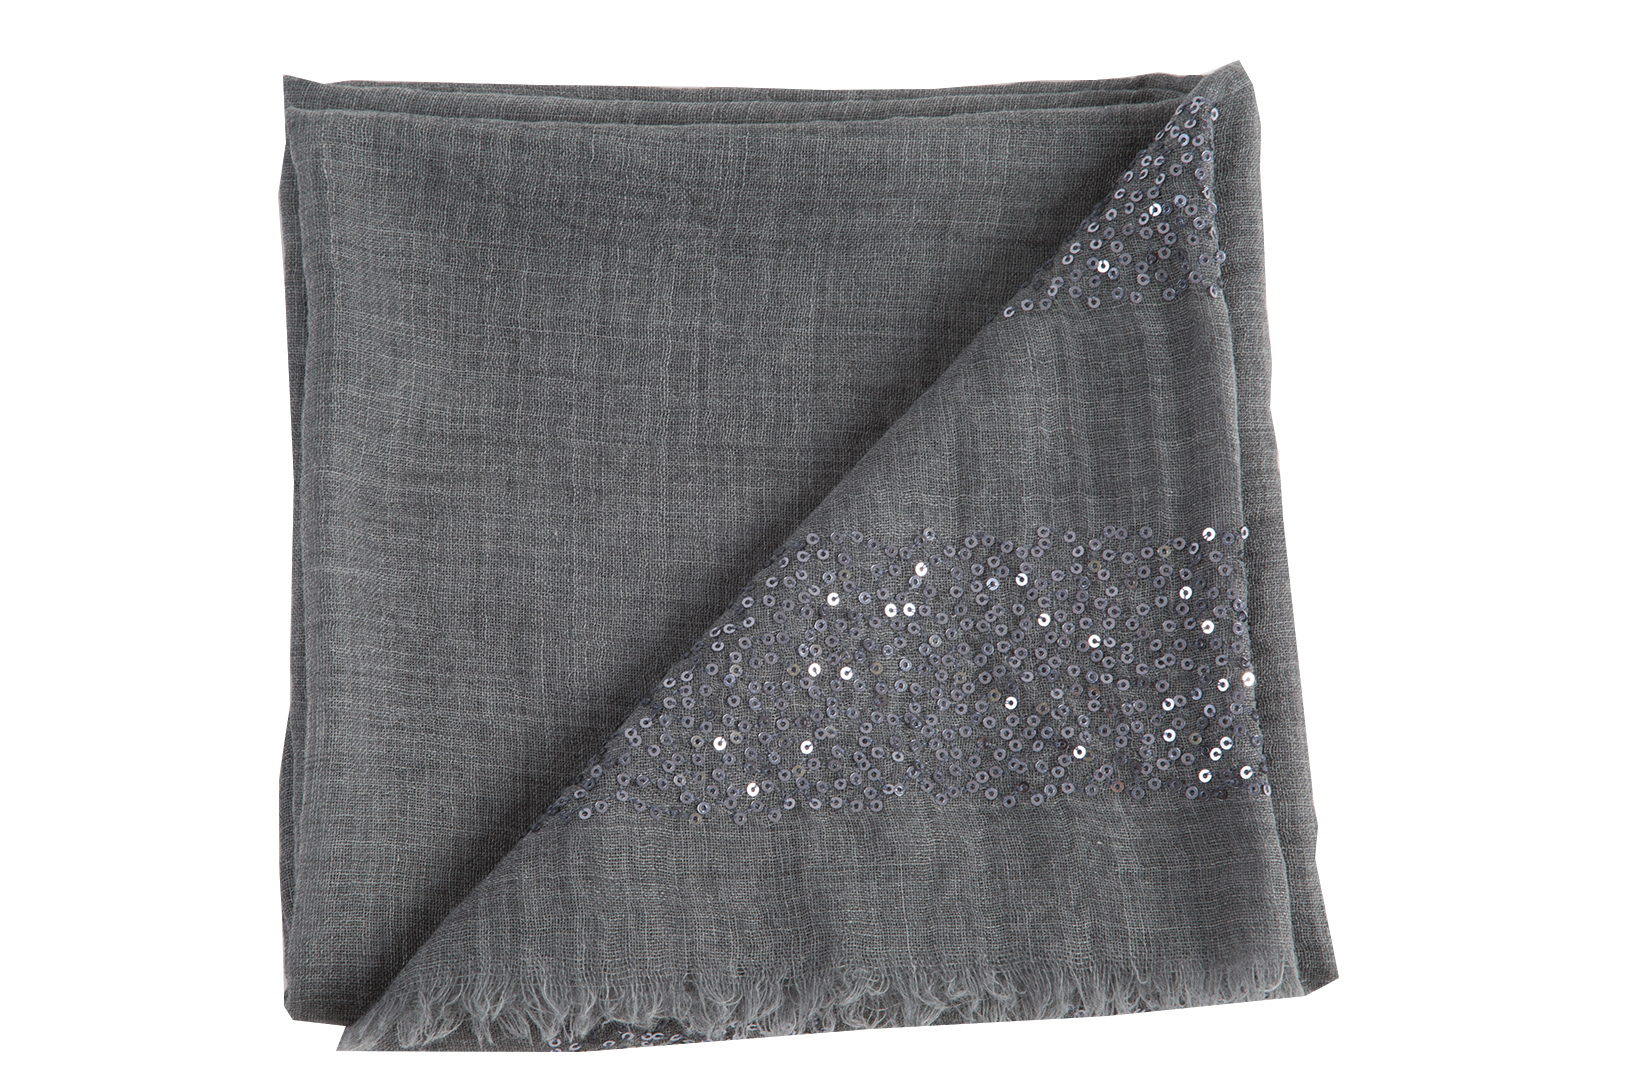 Small sequin pashmina, $99 at Out of Hand